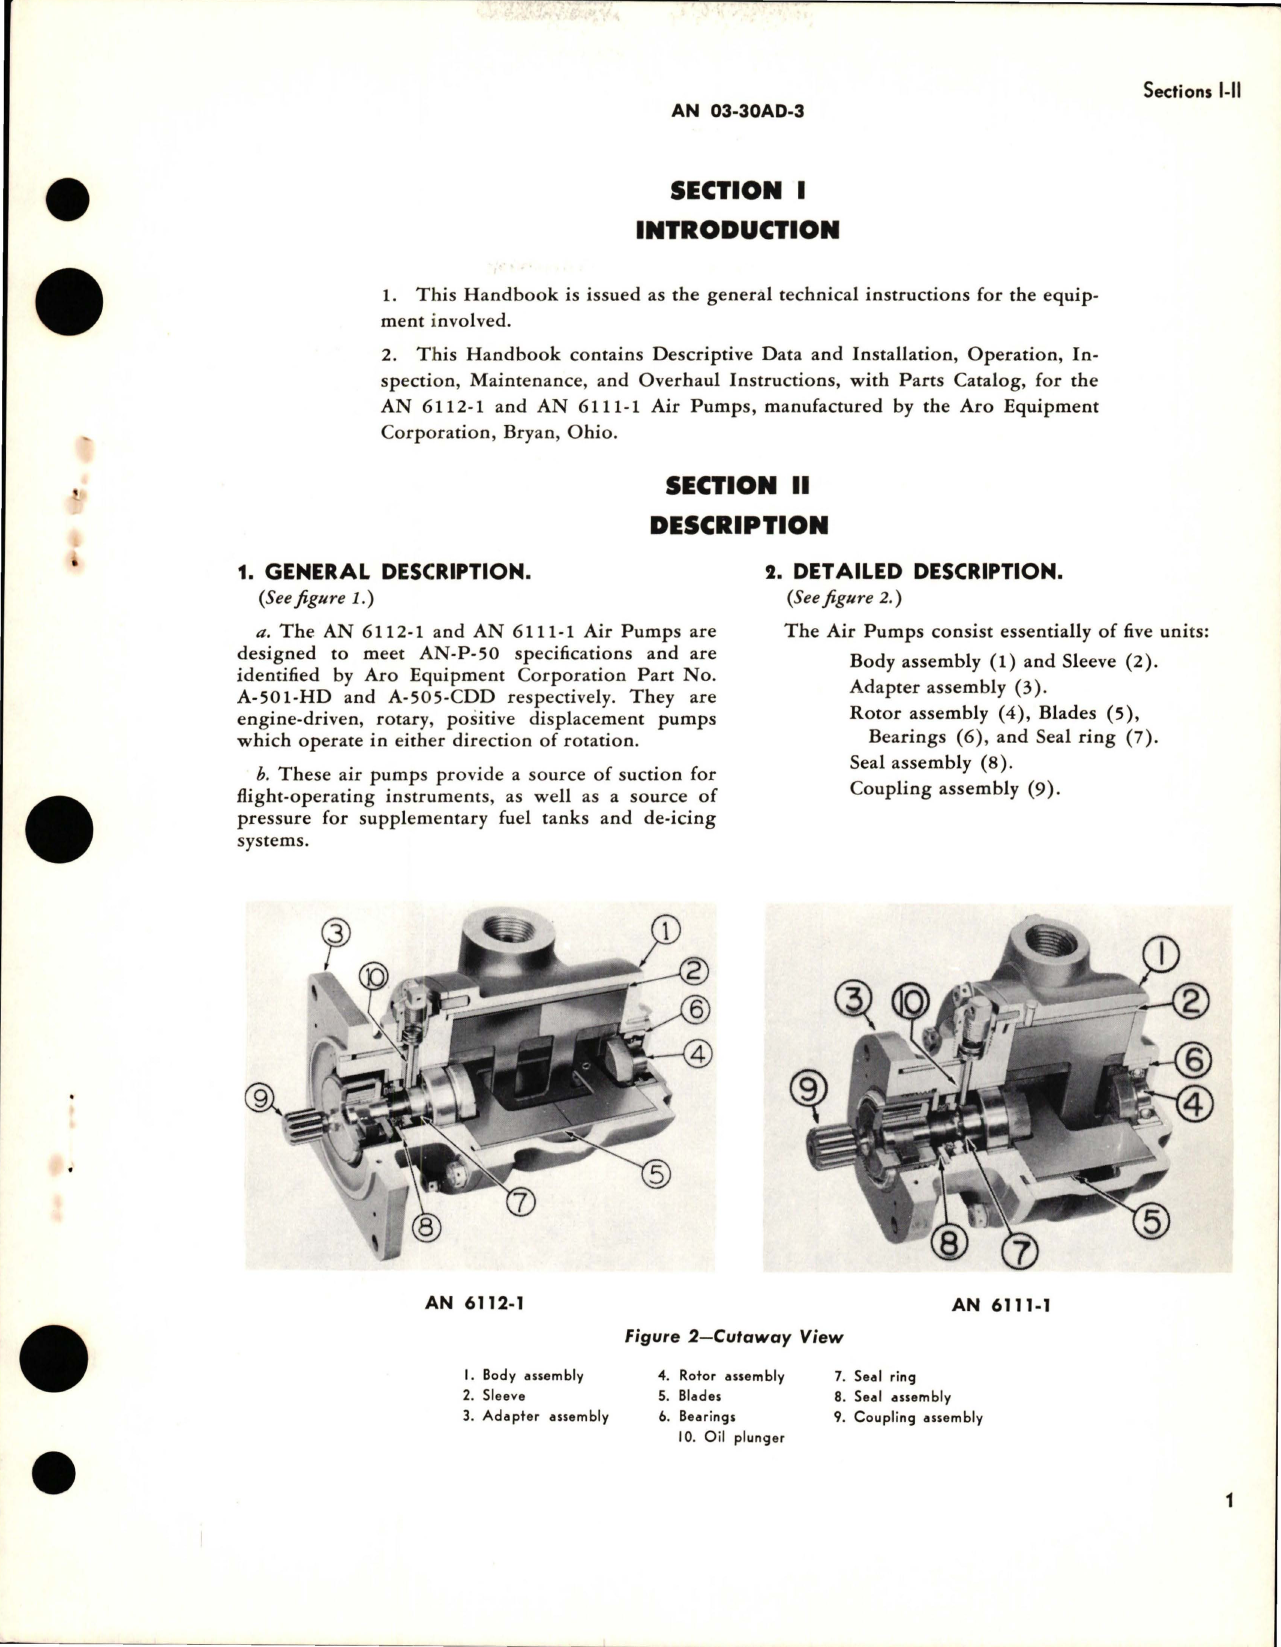 Sample page 5 from AirCorps Library document: Operation, Service and Overhaul Instructions with Parts Catalog for Air Pumps - Types AN6111-1 and AN6112-1 